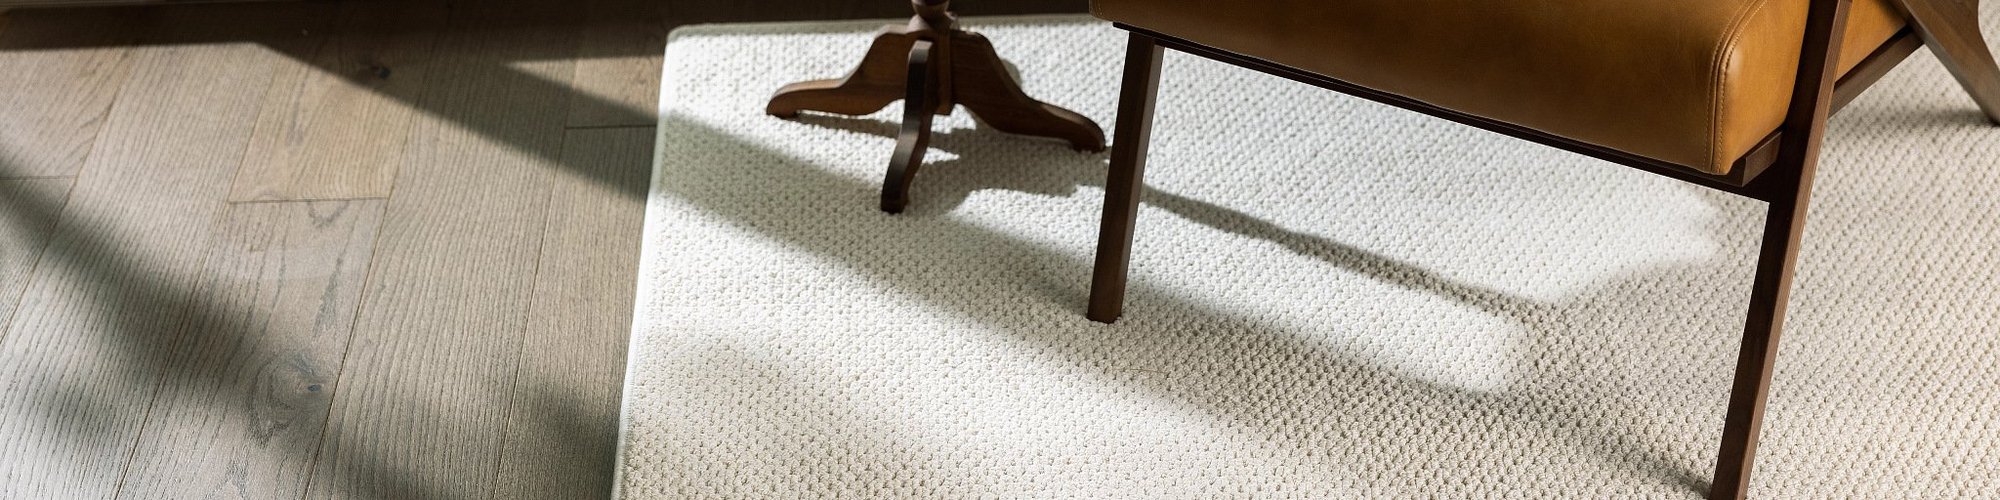 brown chair on white rug from Anderson Flooring Centre, Inc. in Winnipeg, MB